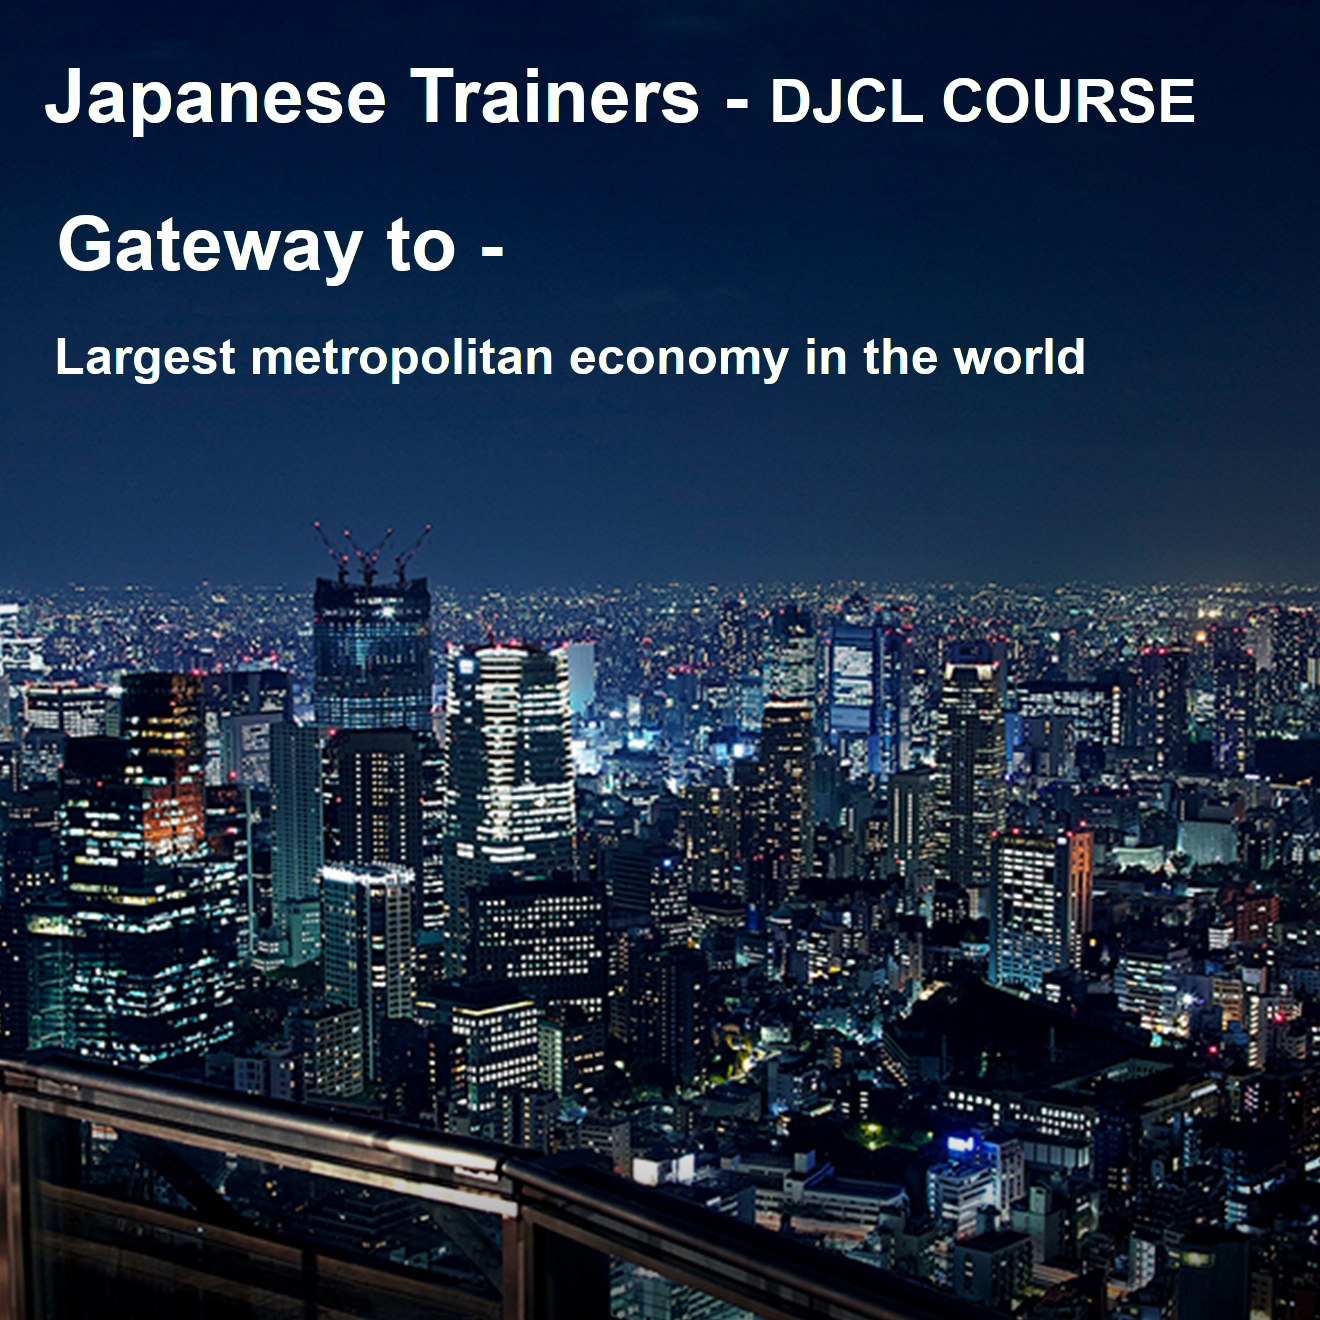 Japanese class in India and Japan - DCJL